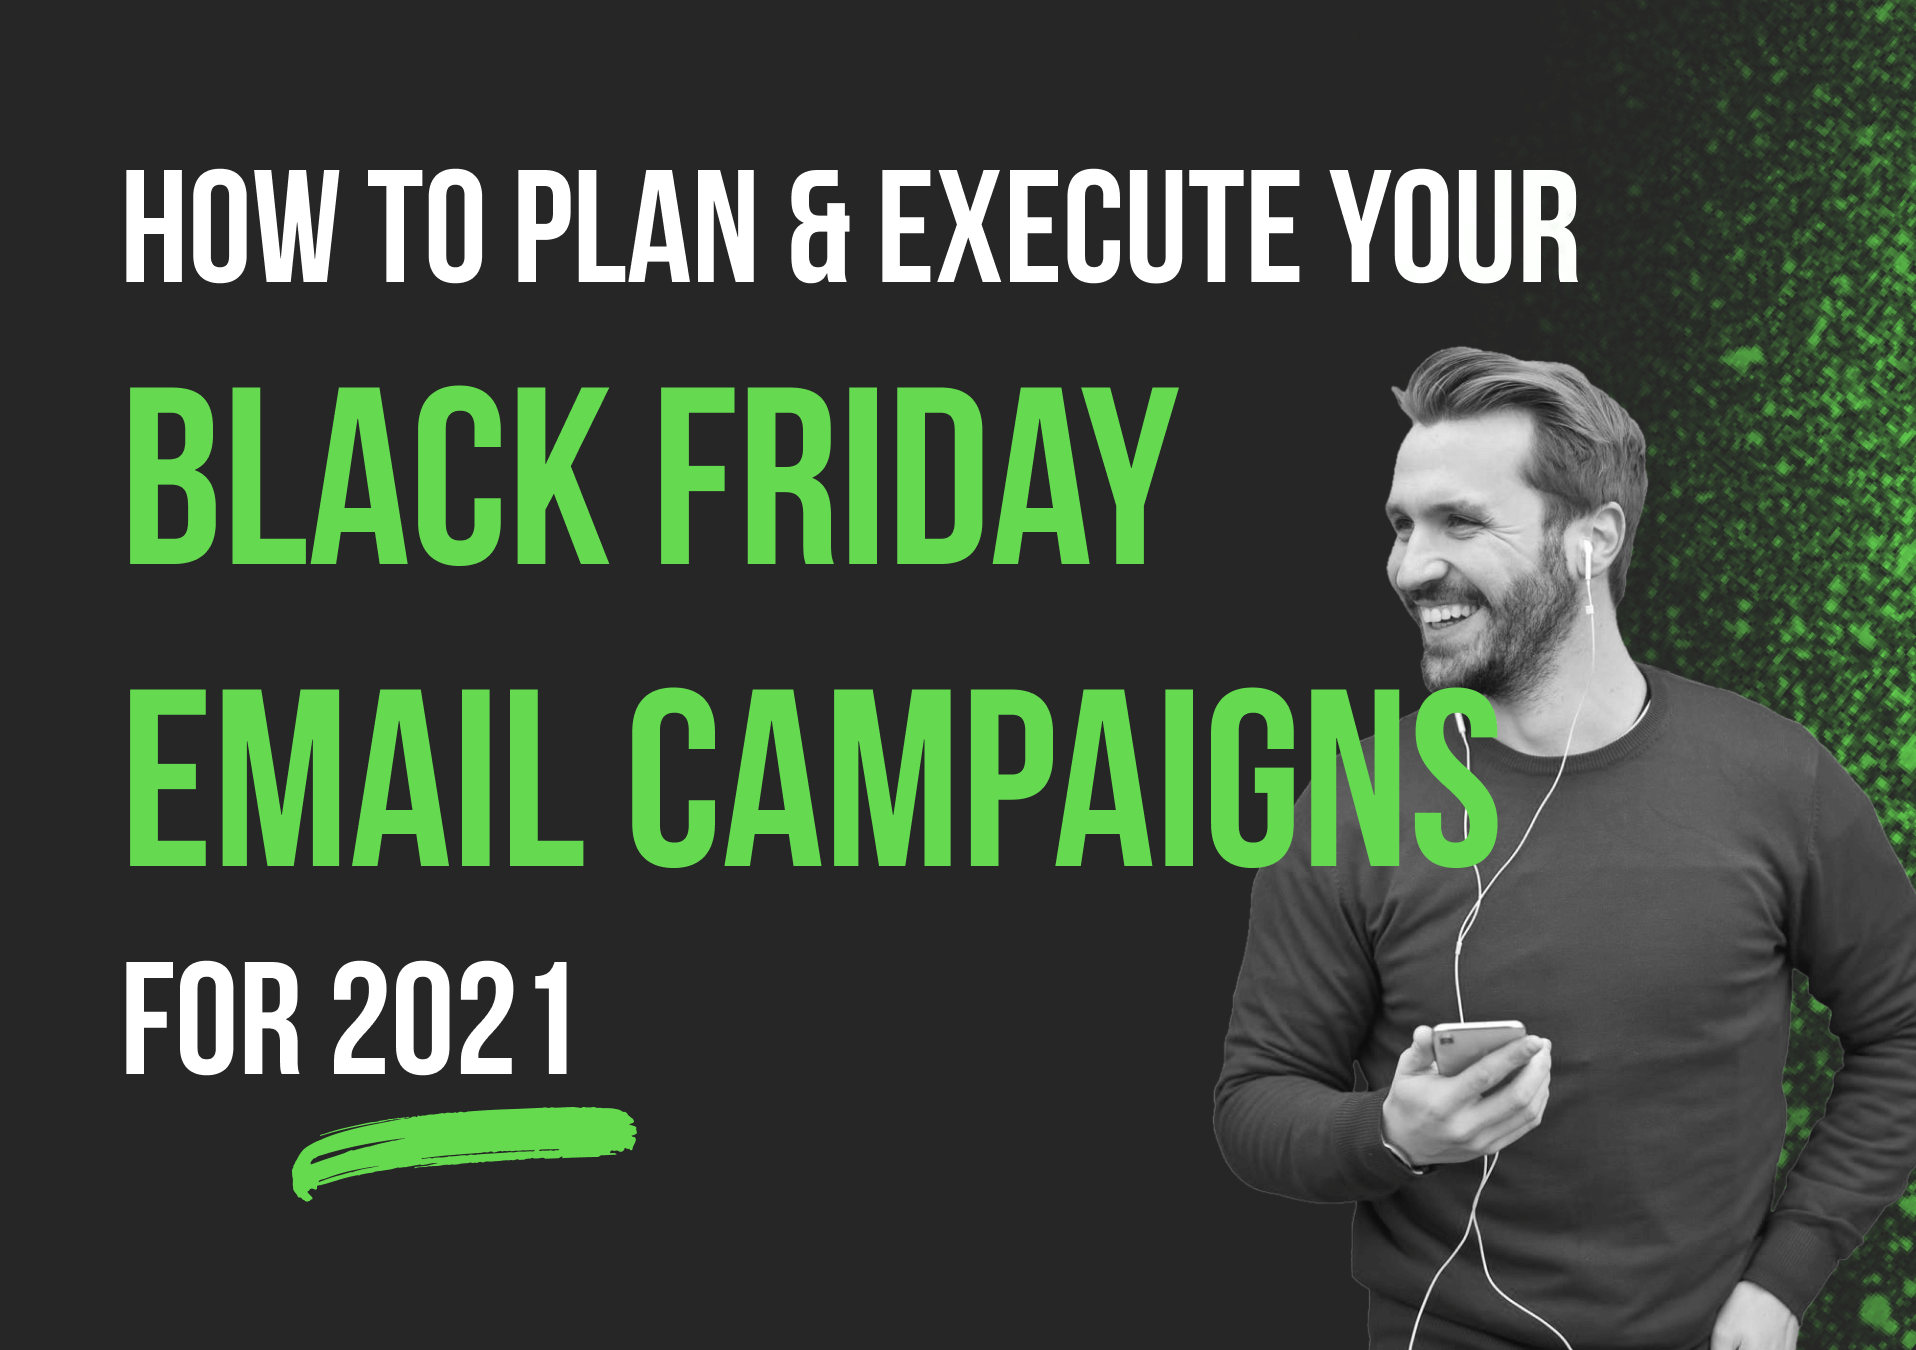 How To Plan and Execute Your Black Friday Email Campaigns for 2021 (BFCM Series Part 2)